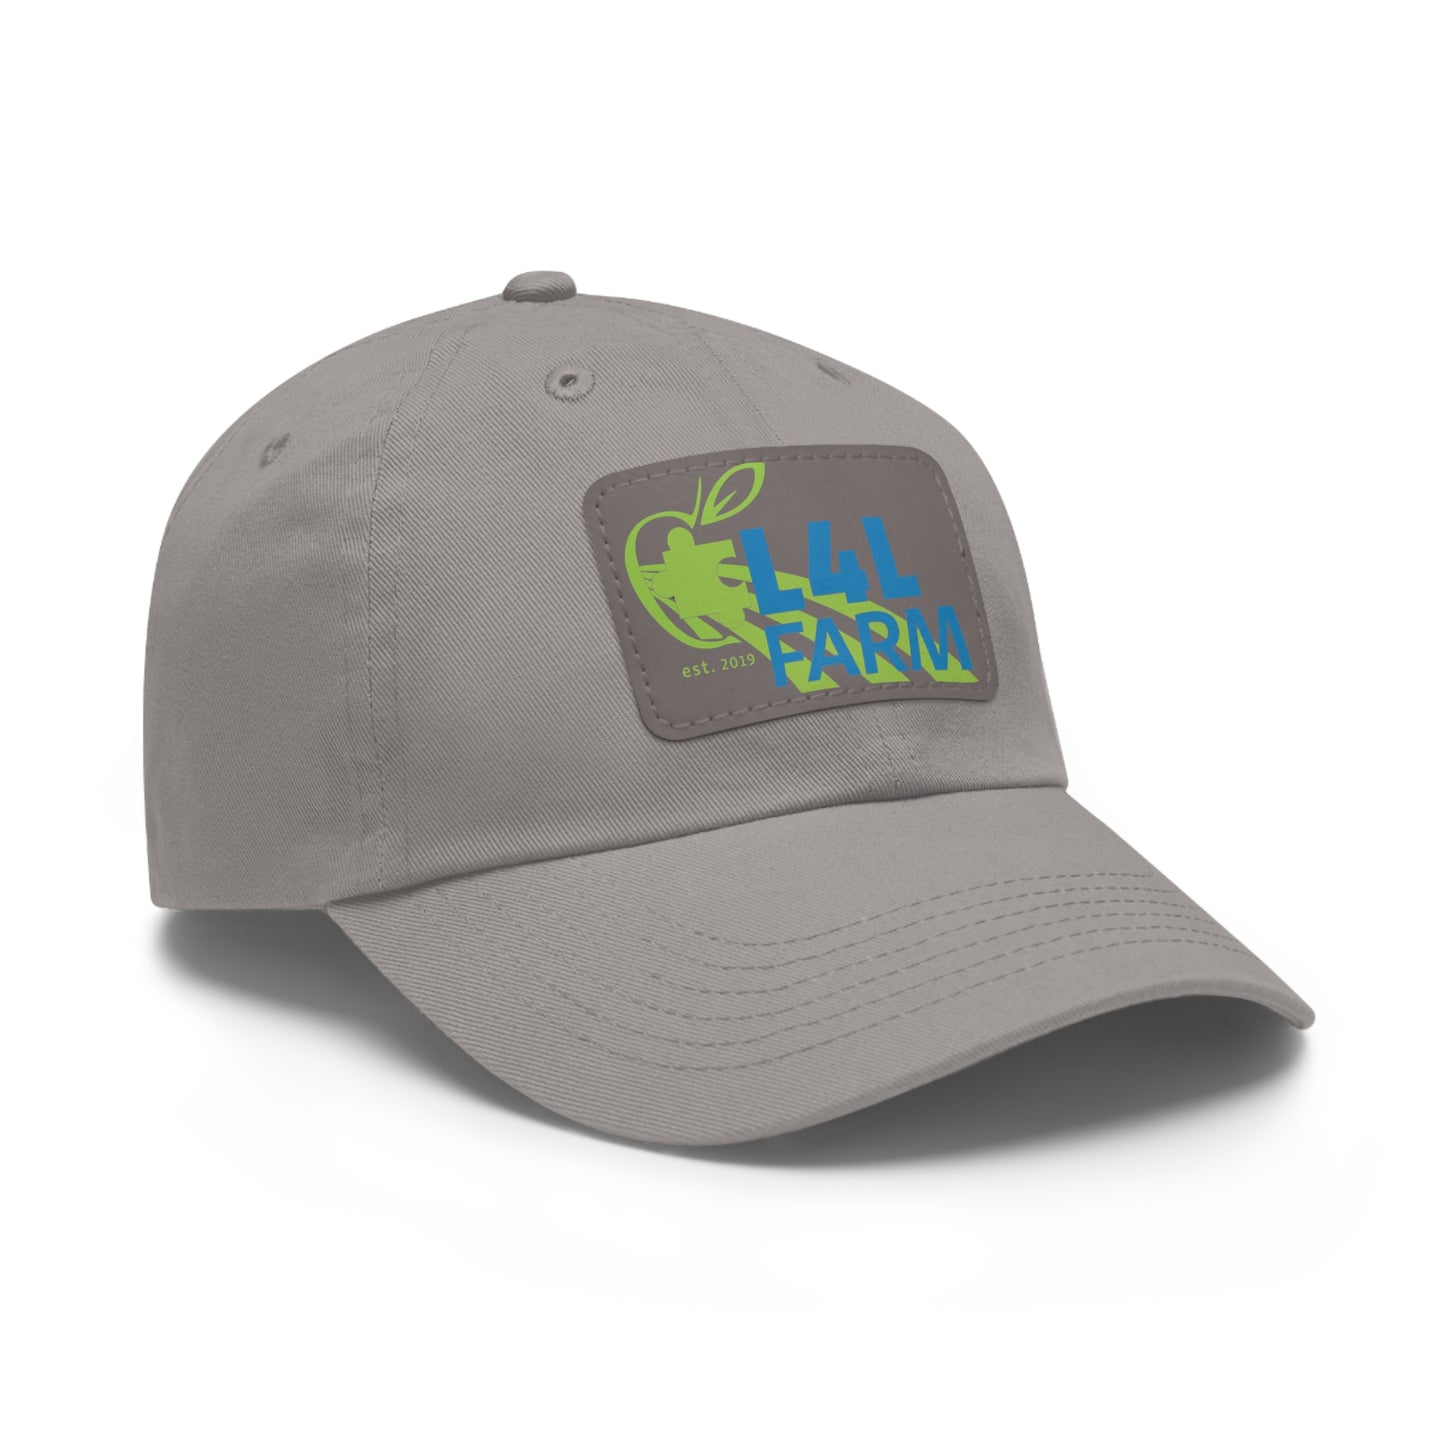 L4L Farm Dad Hat with Leather Patch (Rectangle)